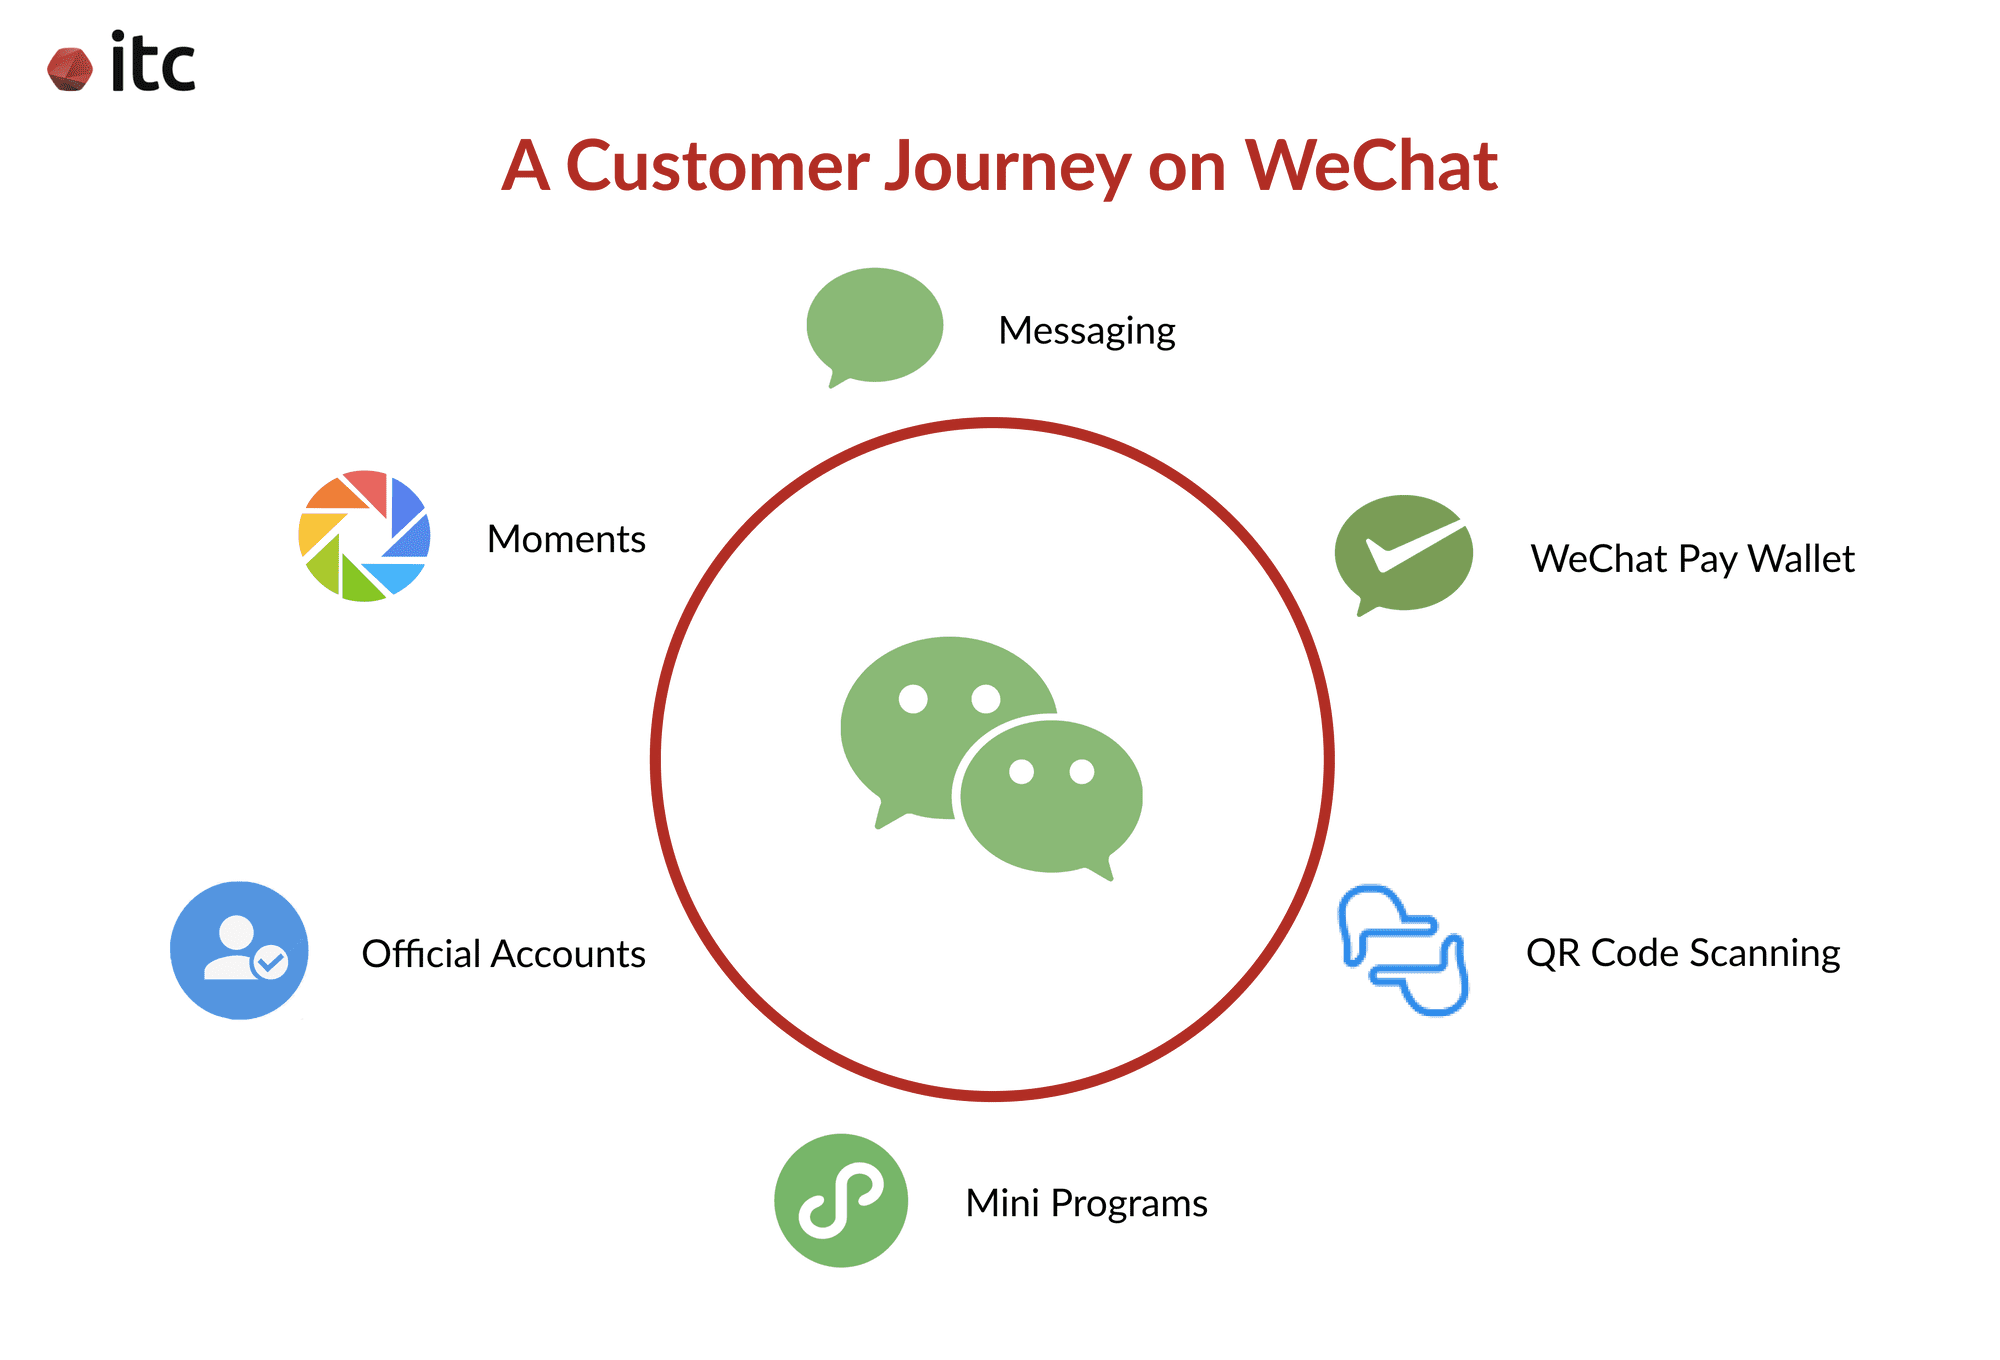 A chart displaying a customer journey on WeChat, switching from the Messaging function, Moments feed, Official Accounts, and Mini Programs, to WeChat Pay and QR code scanning throughout the day